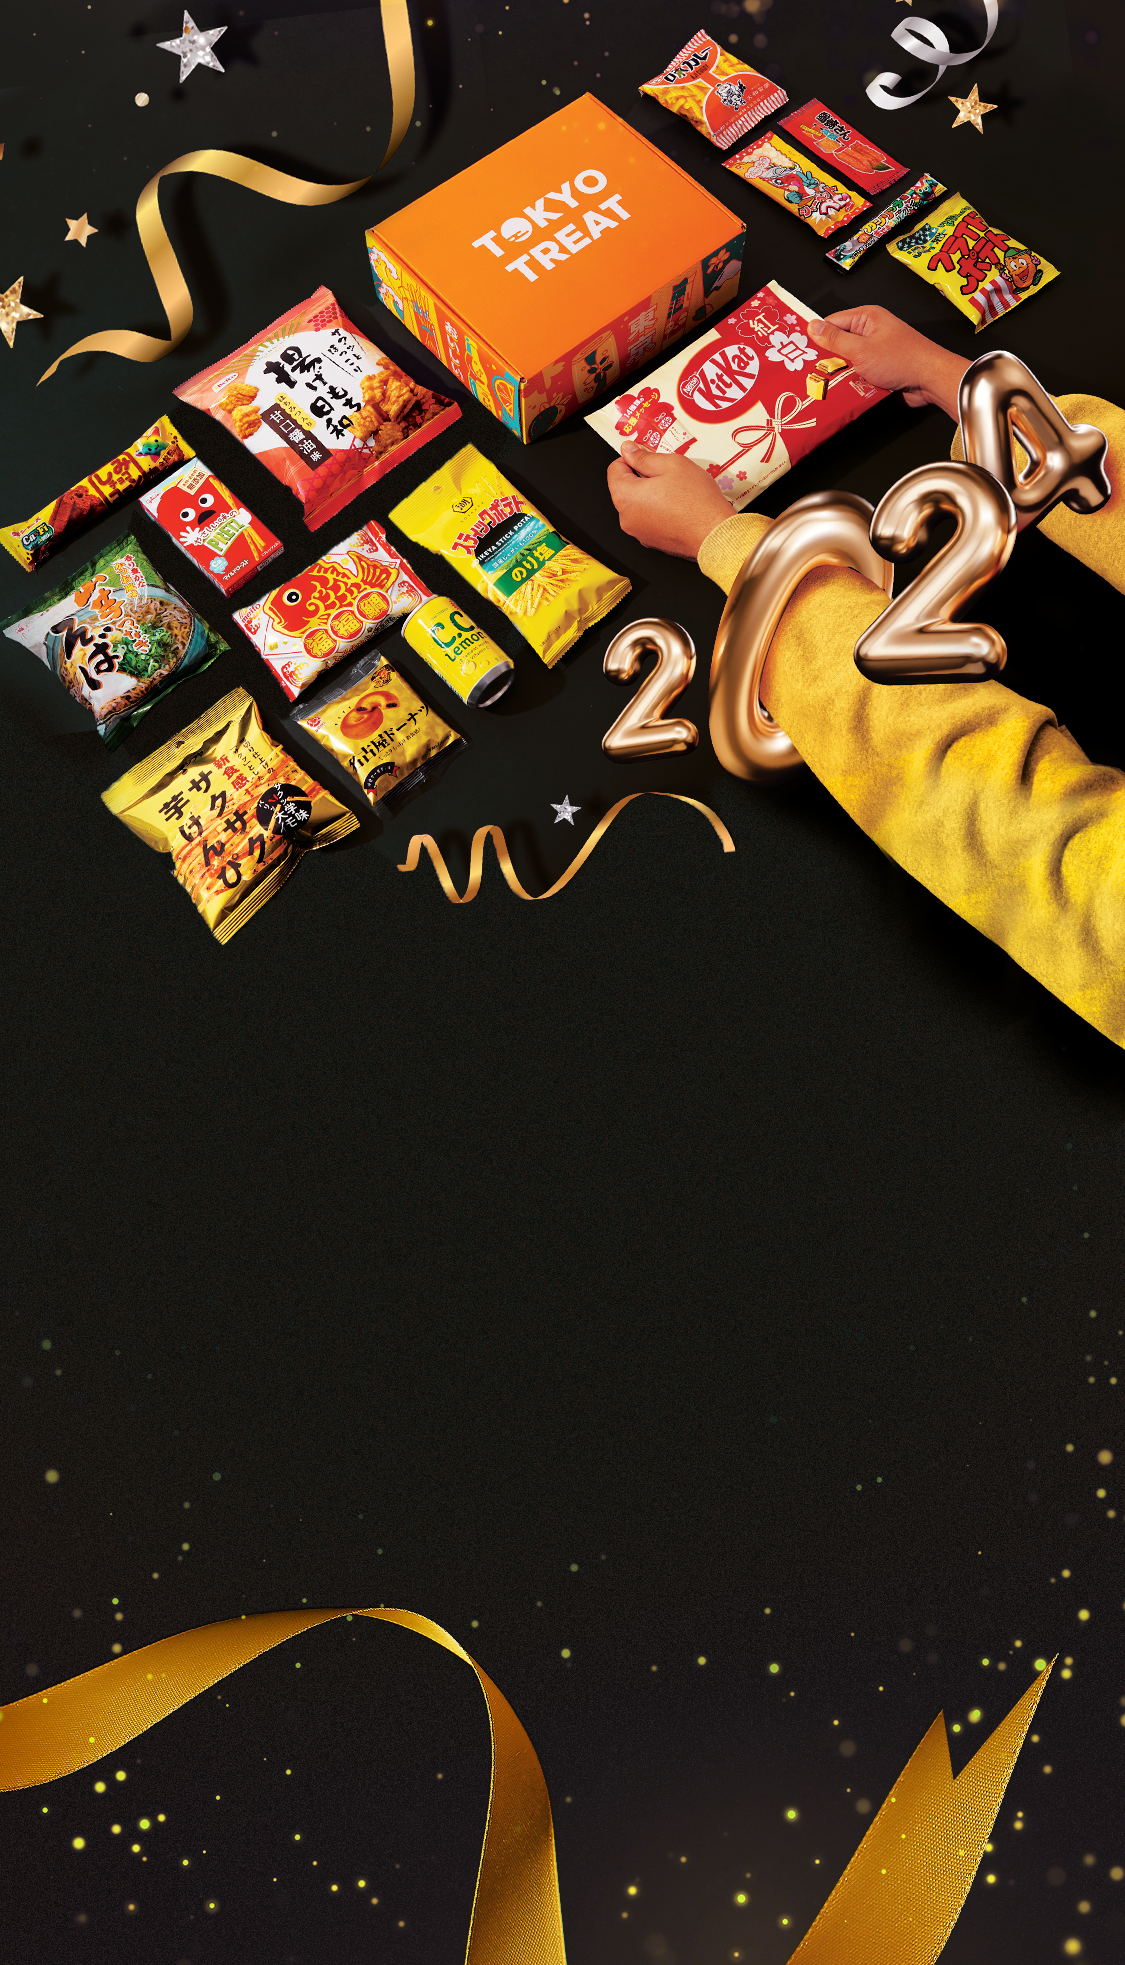 TokyoTreat box sits against a dark backdrop, surrounded by box items and New Year's motifs.